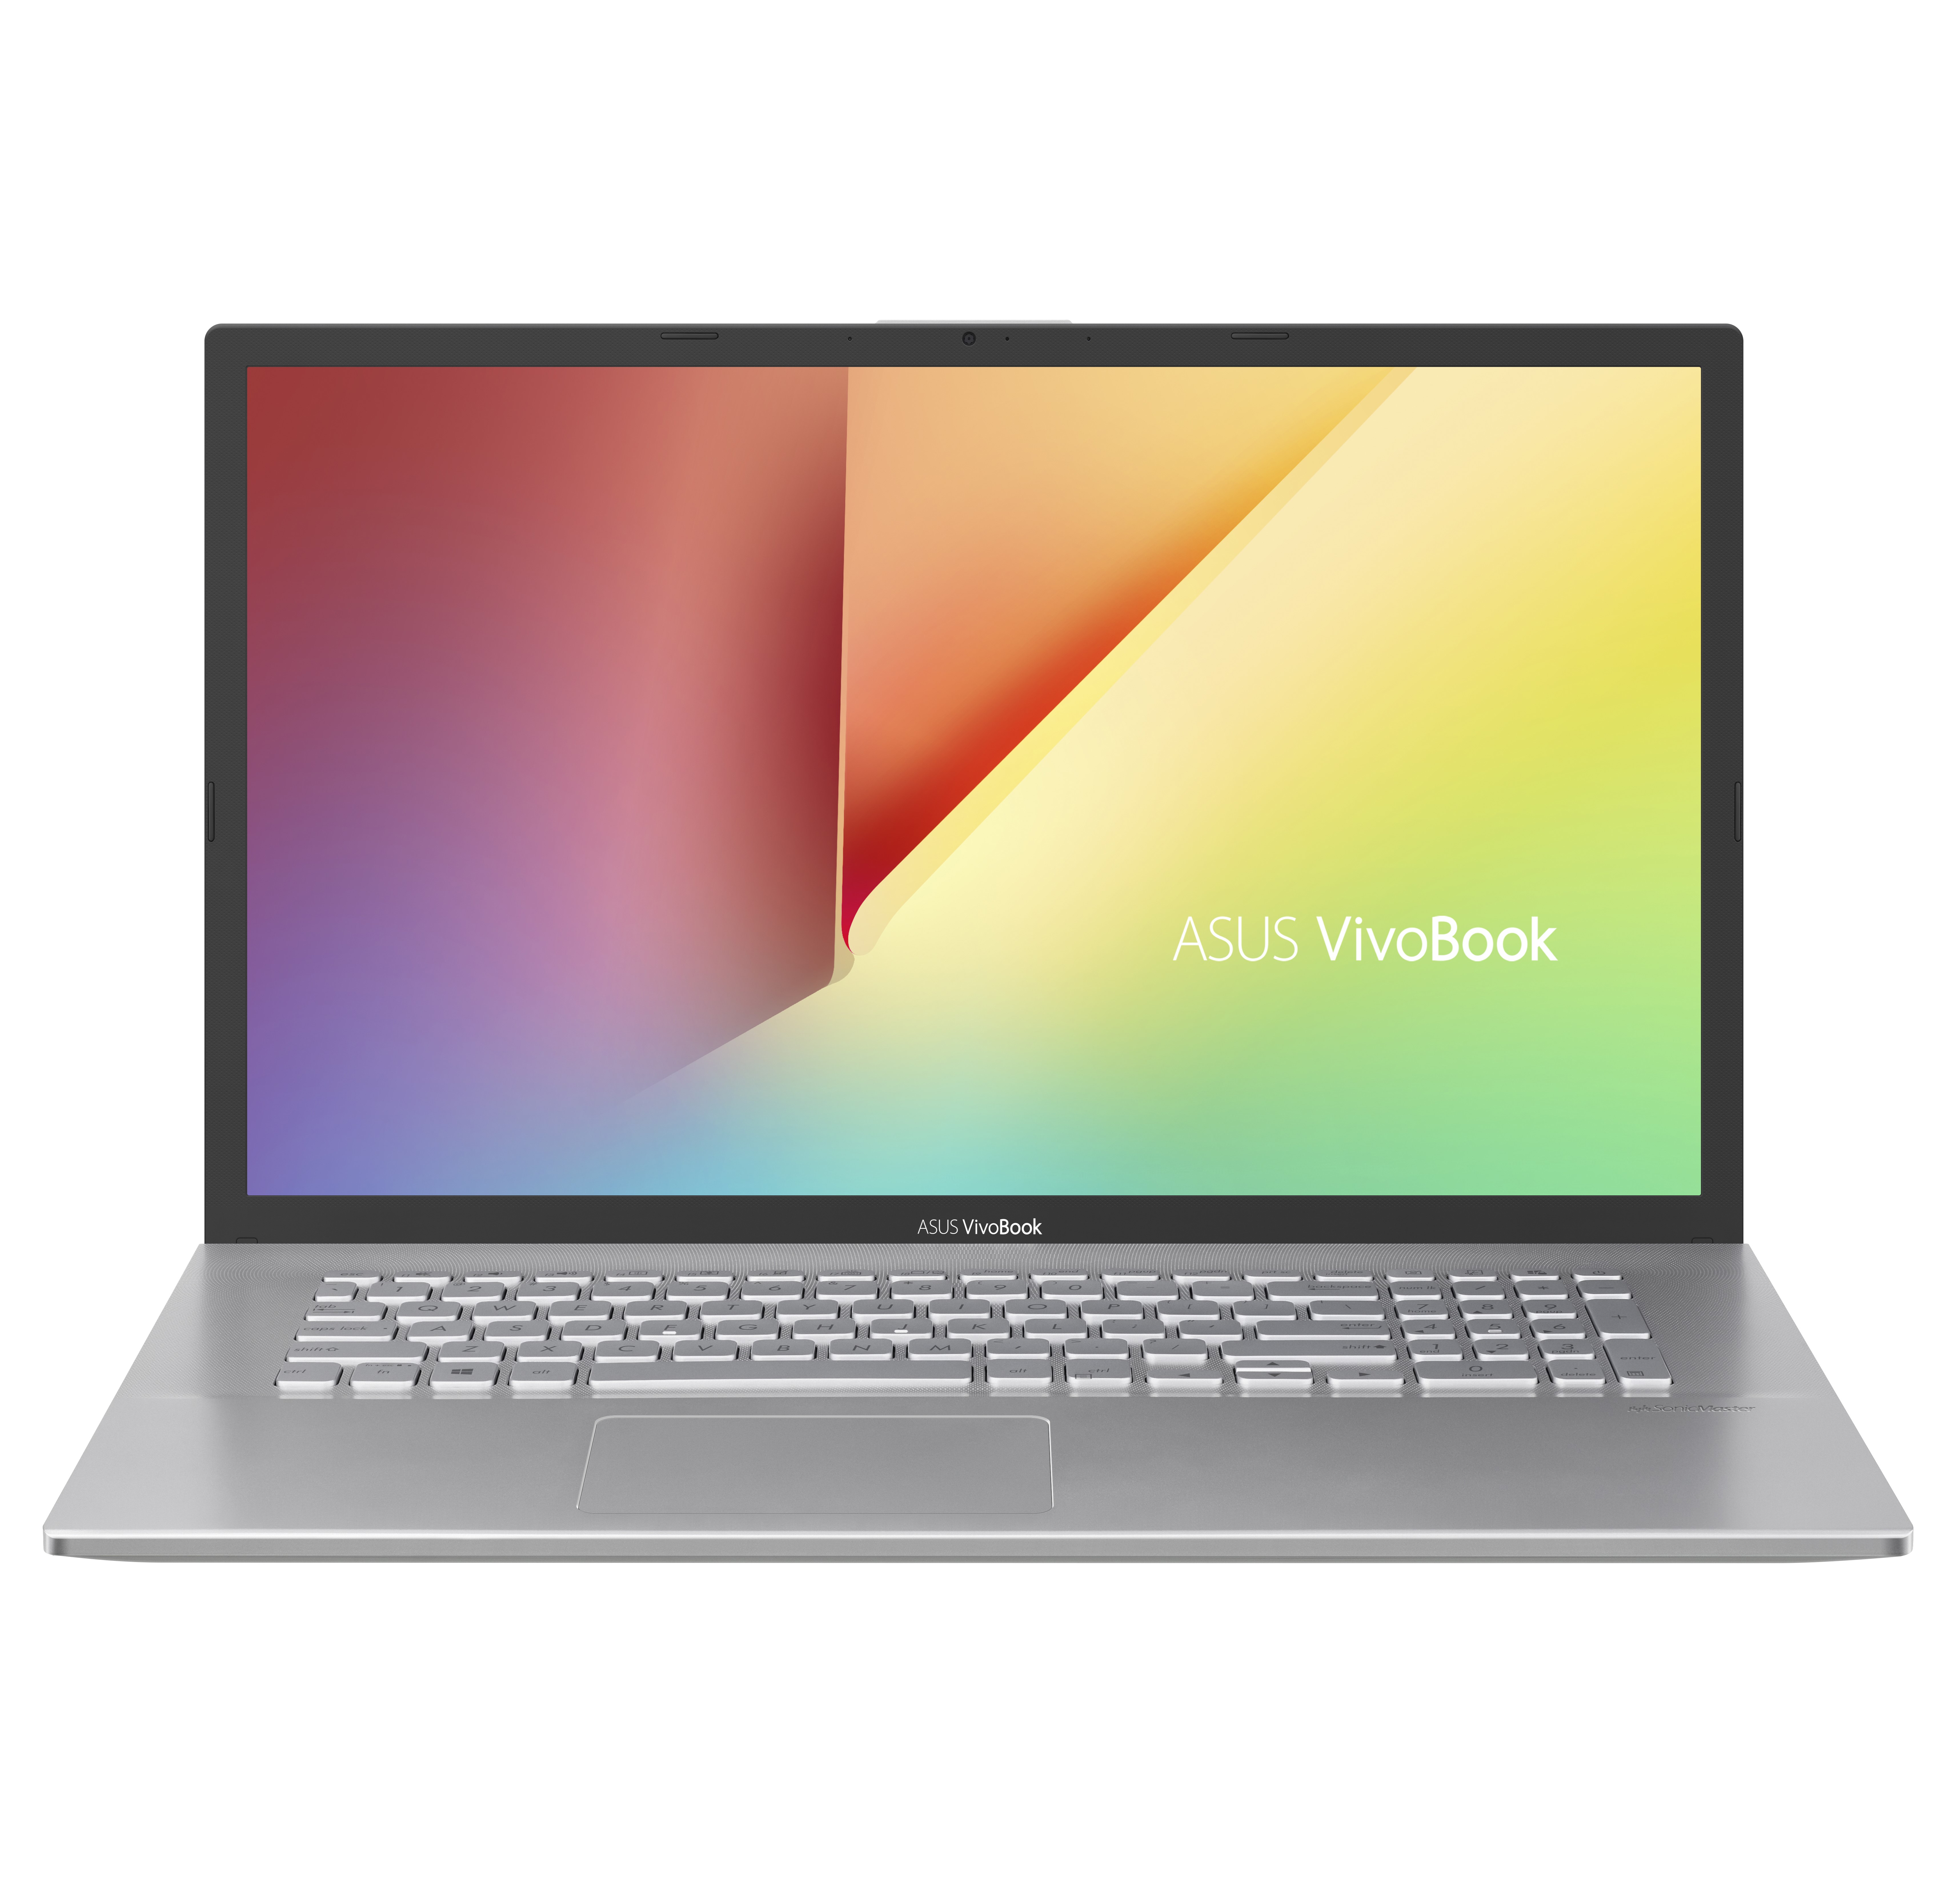 ASUS VivoBook S17 Thin and Light Laptop:17.3" FHD, i5-1035G1, 8GB DDR4, 128GB SSD +1TB HDD, Win 10H (Refurbished) $389 + Free Shipping